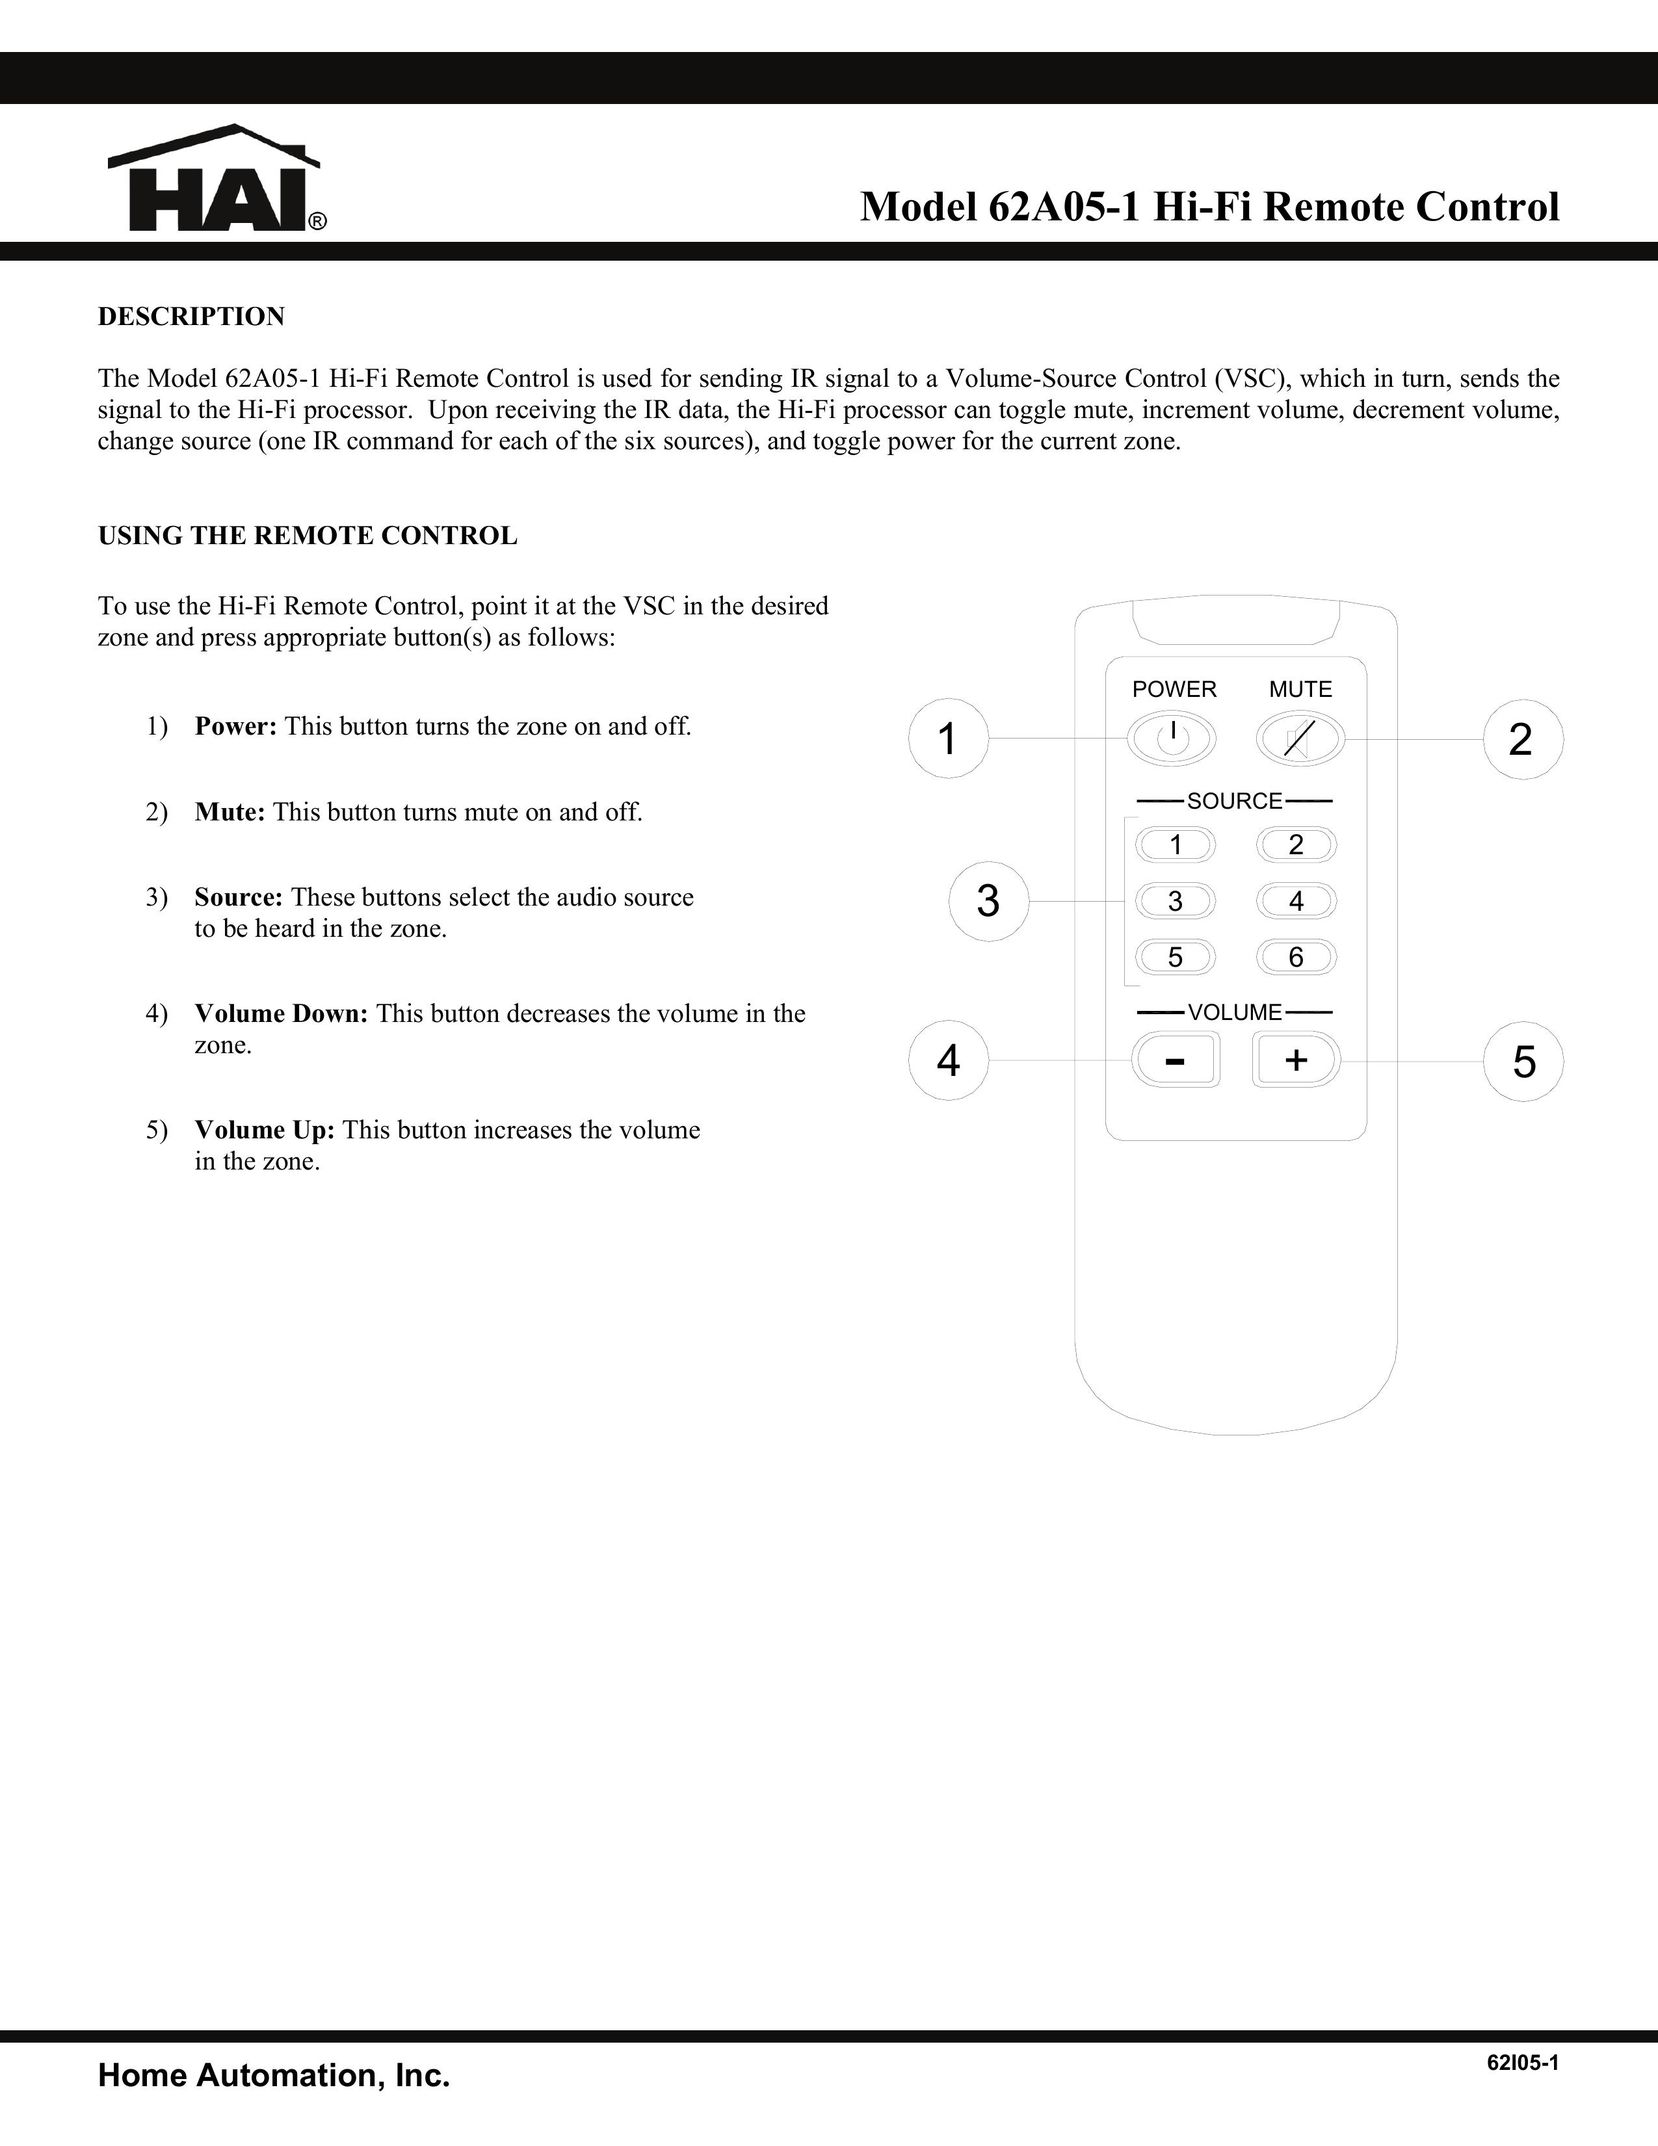 Home Automation 62A05-1 Universal Remote User Manual